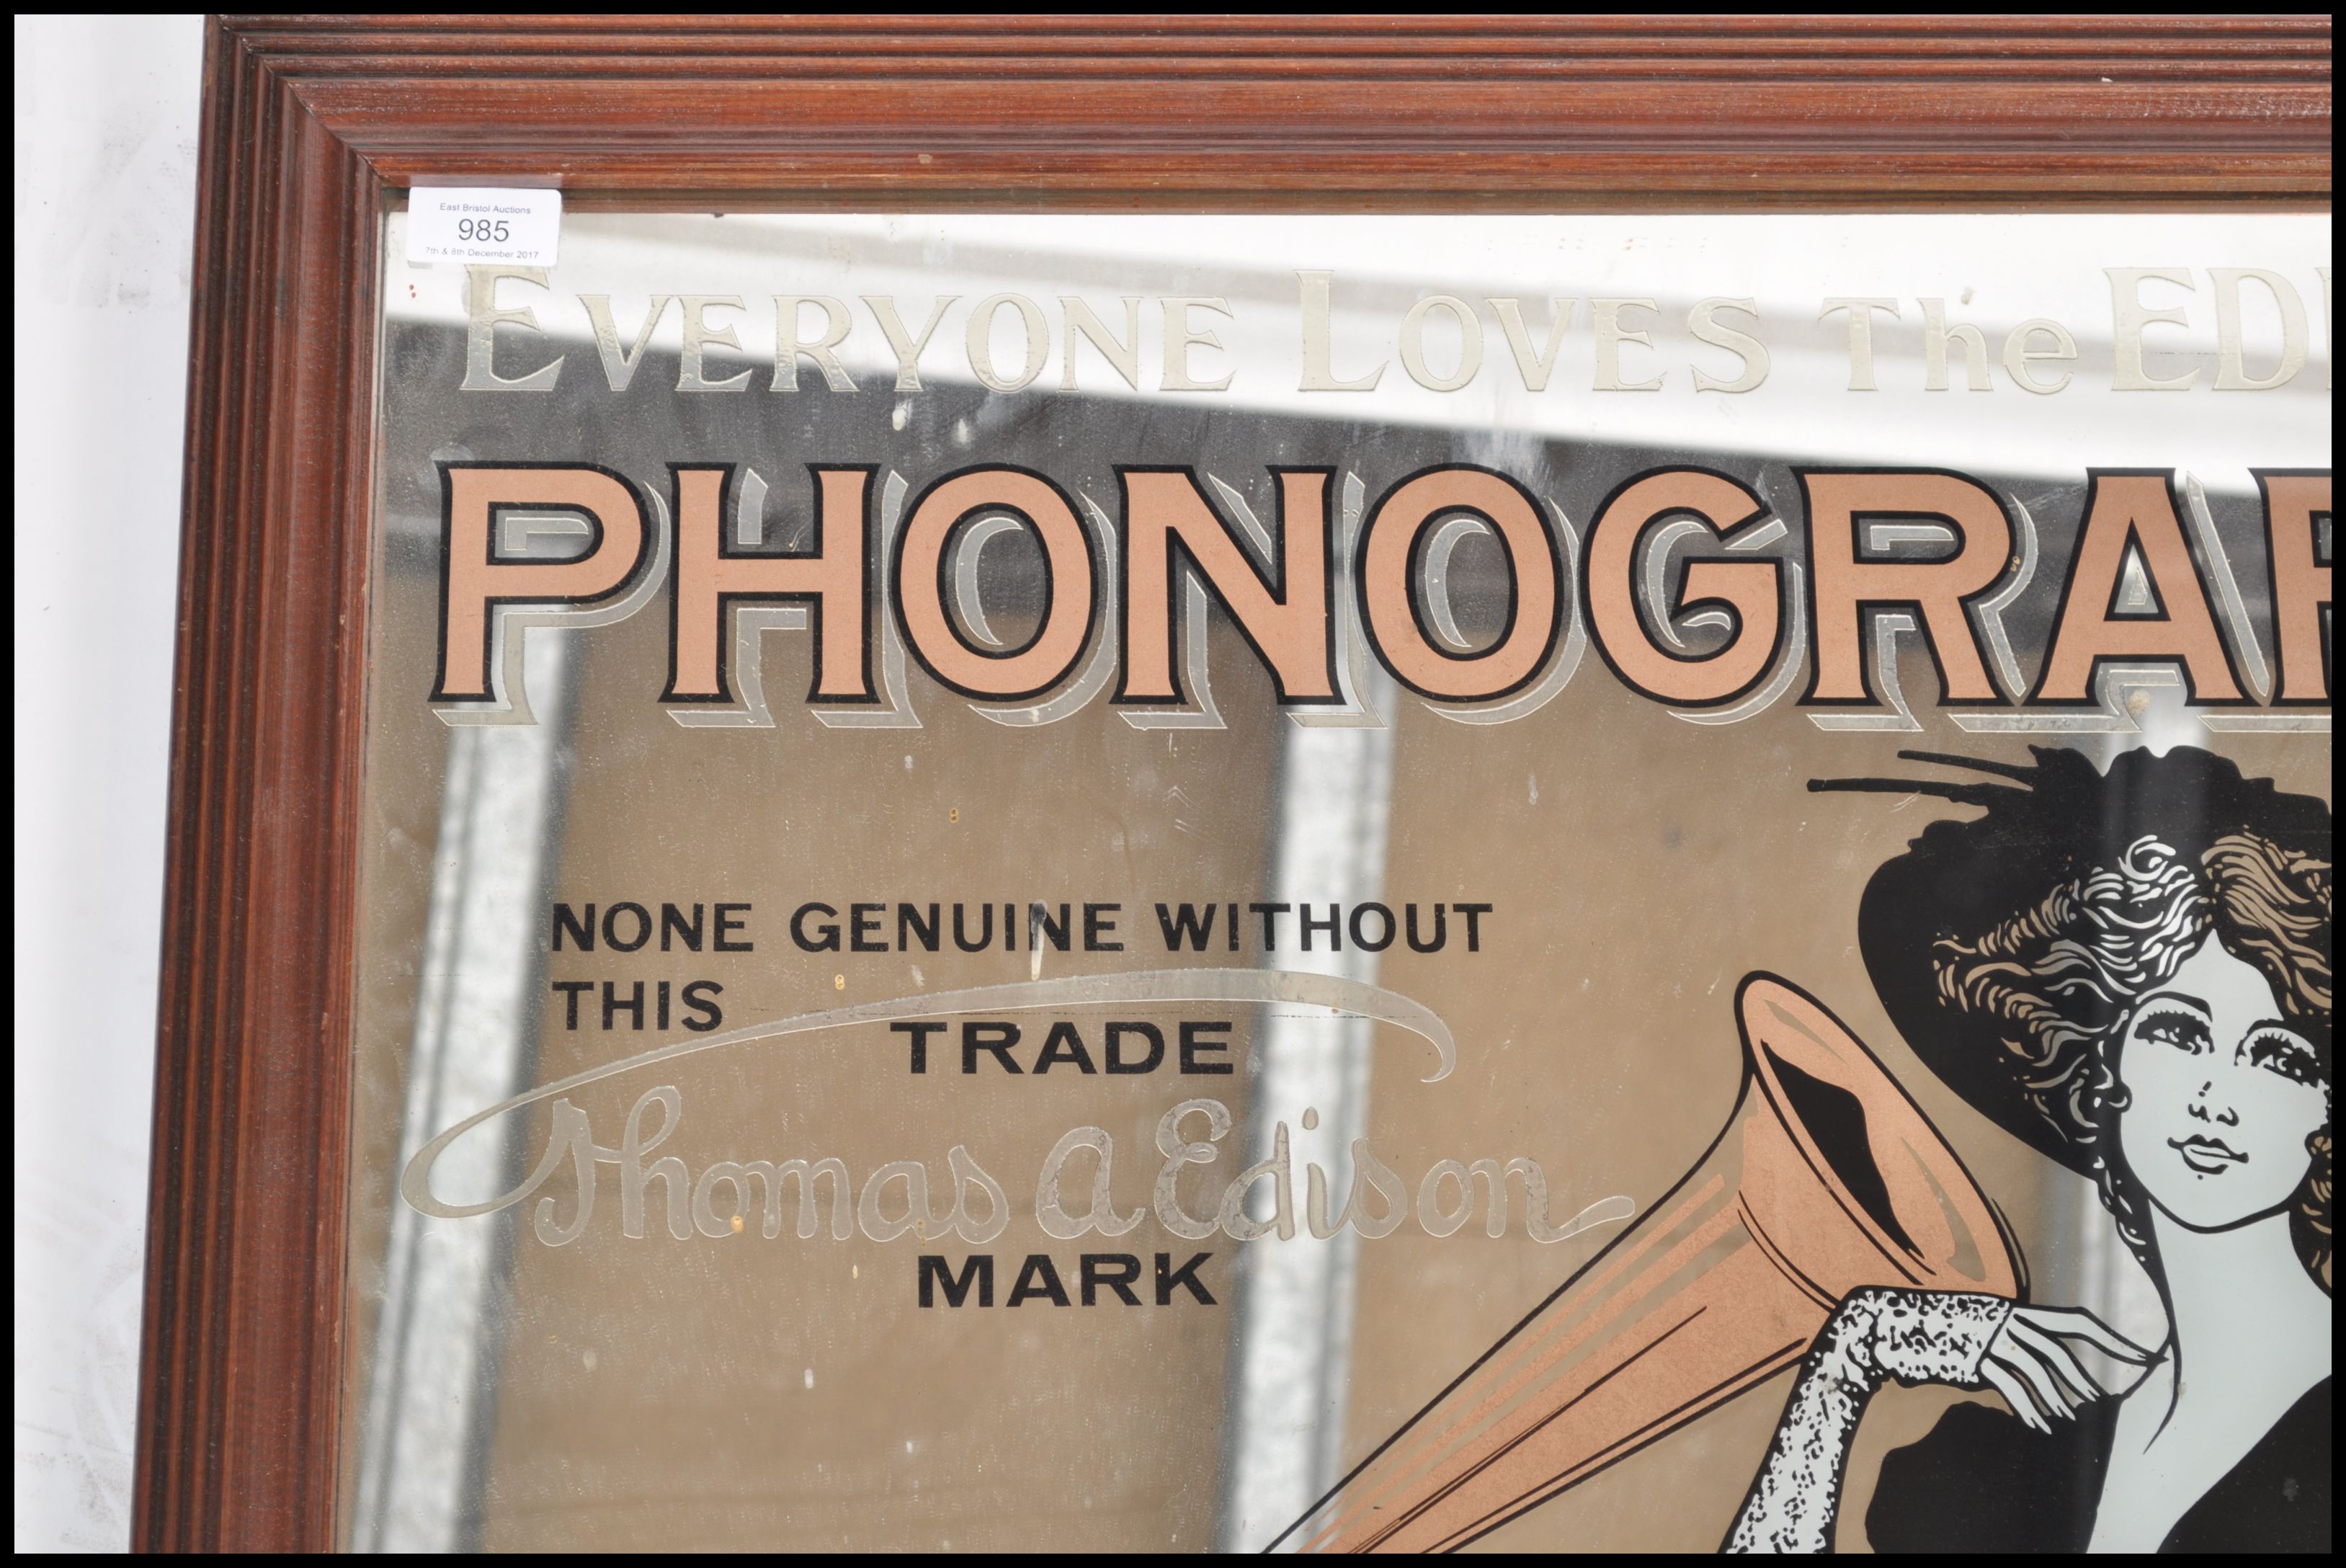 A 20th century vintage advertising point of sale mirror advertising The Edison Phonograph. The - Image 3 of 3